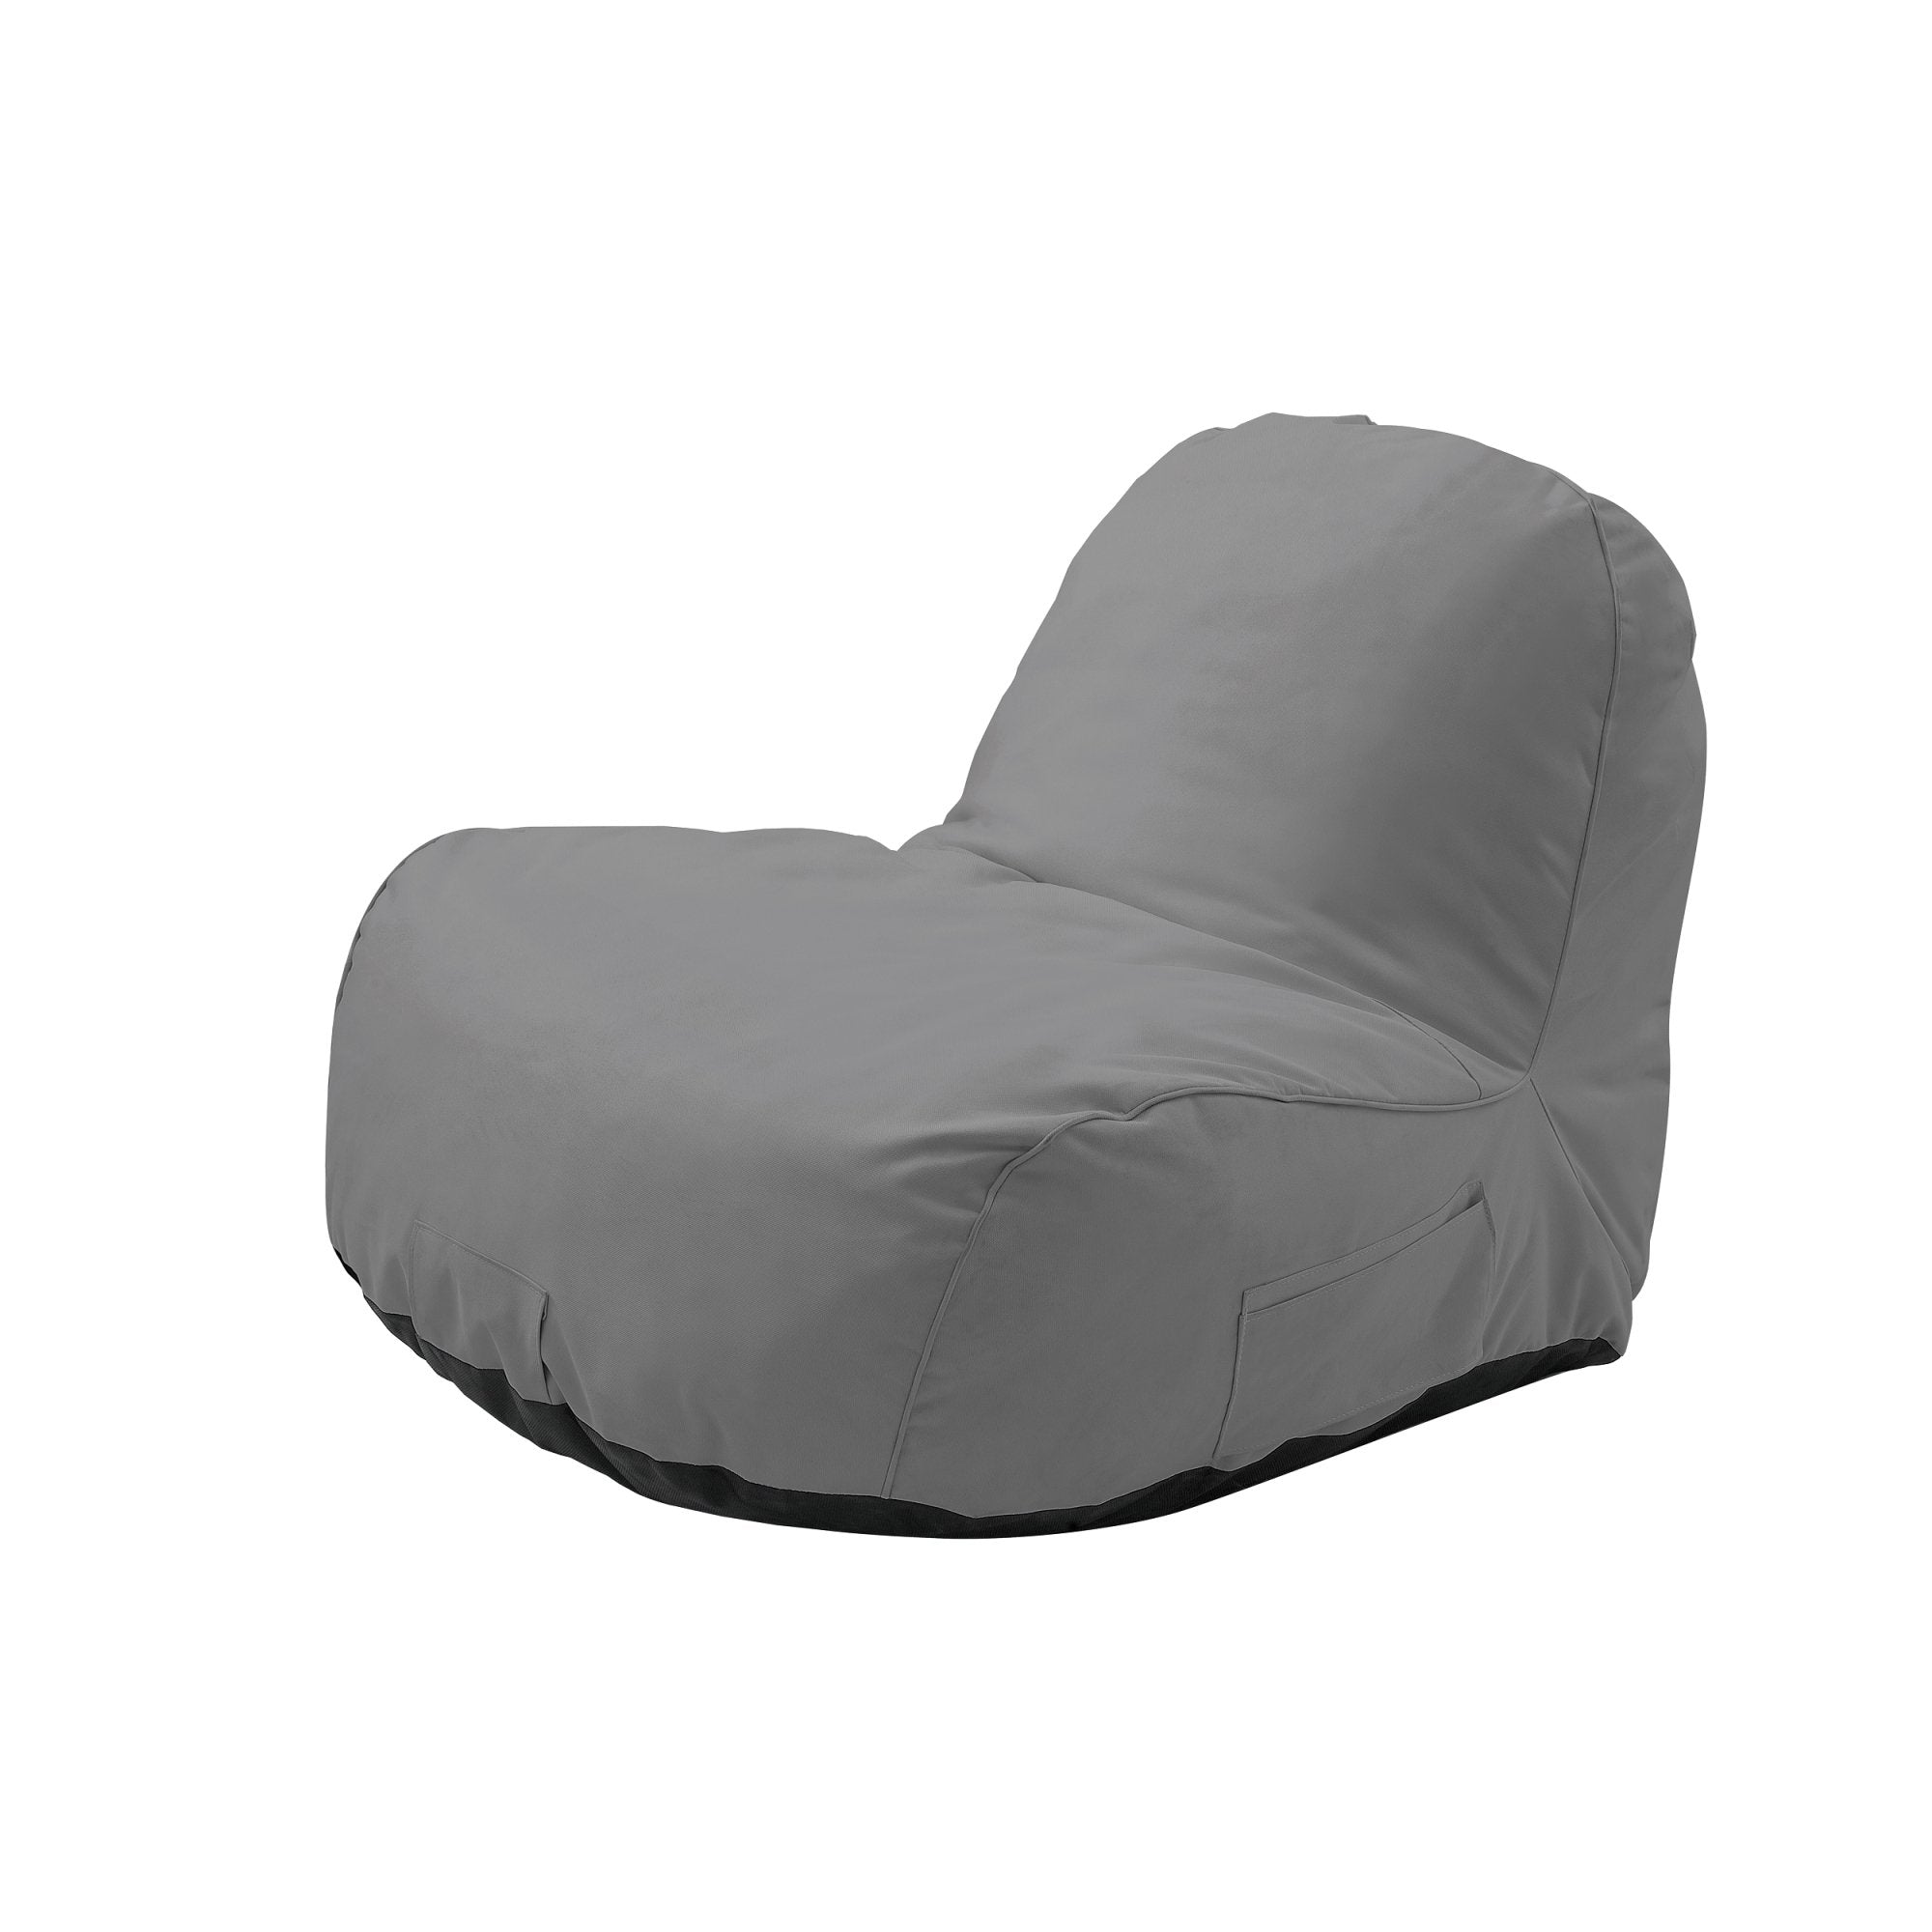 Amazon.com: BEAUTRIP Lazy Air Chair Self Inflating Camping Festival  Inflatable Lounger Indoor Outdoor Bean Bags Adult Gaming Beanbag Chairs :  Sports & Outdoors